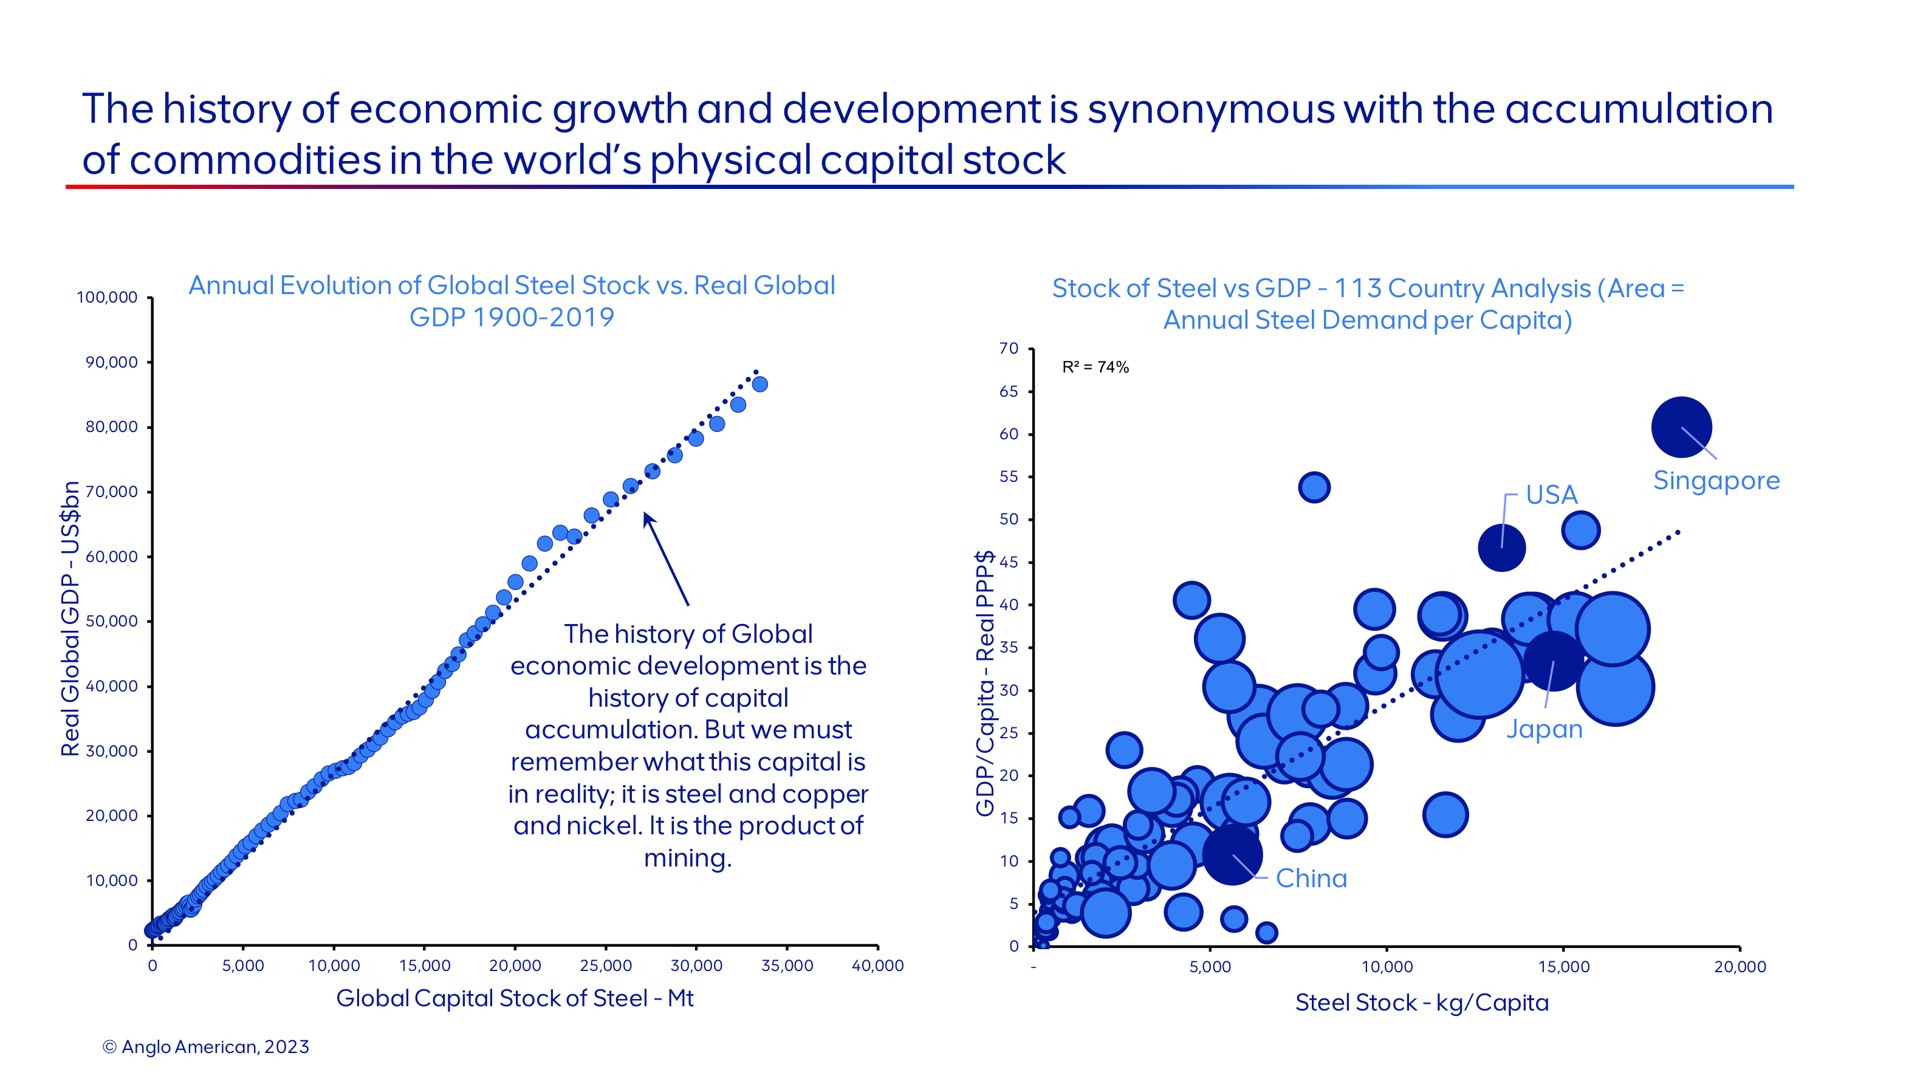 the history of economic growth and development is synonymous with the accumulation of commodities in the world physical capital stock on | AngloAmerican